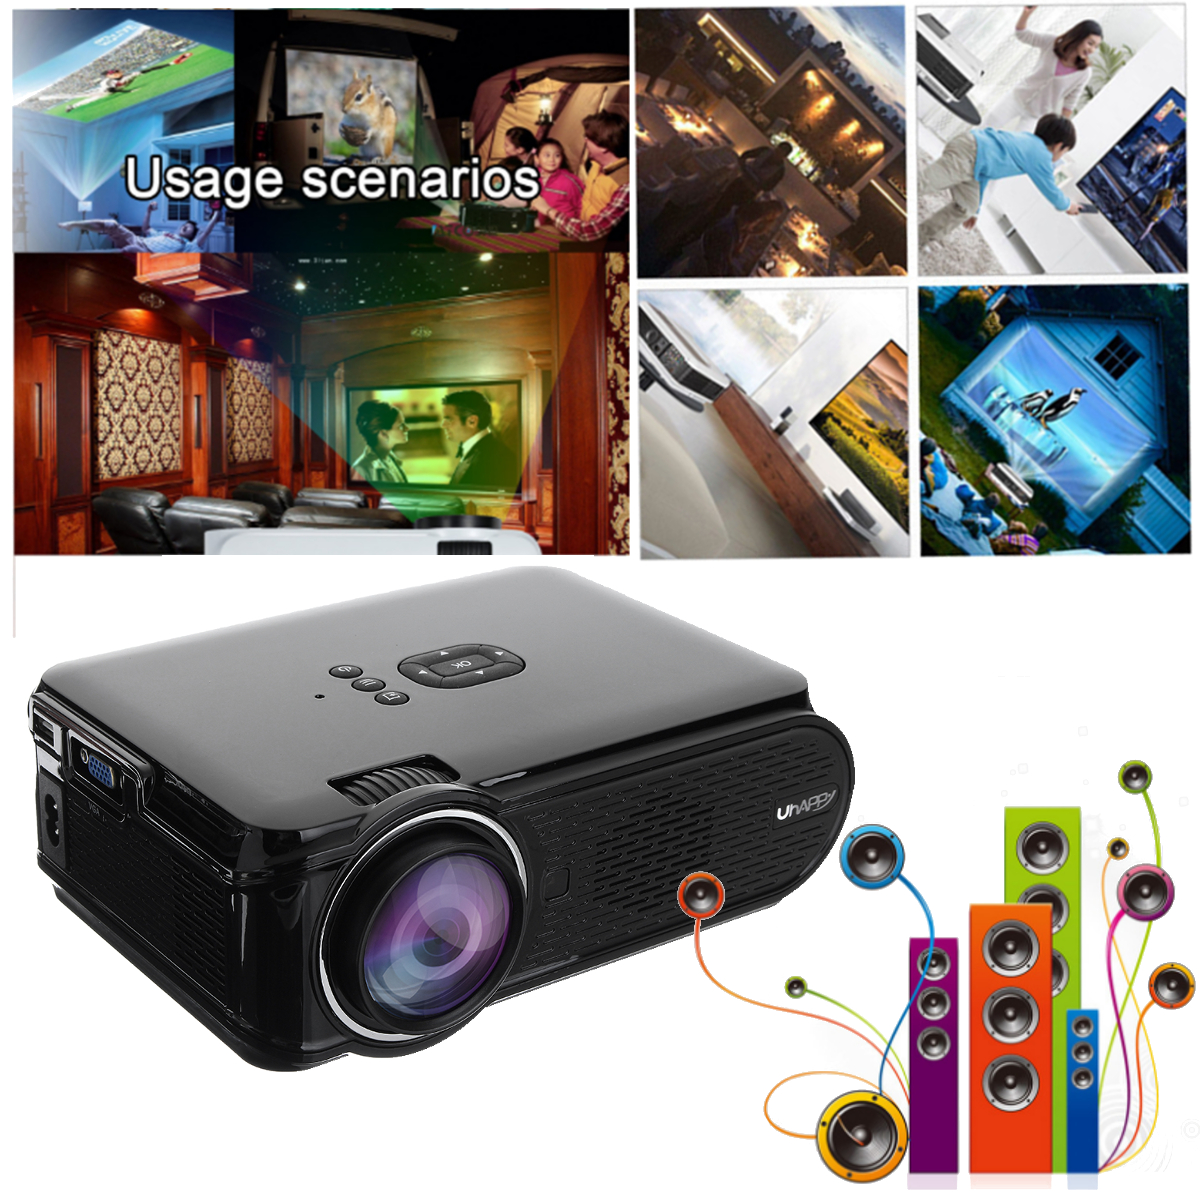 UHAPPY U90 Black Android 6.0 2000 Lumens LED WiFi bluetooth 4.0 Projector 800 x 480 Support 1080p 27